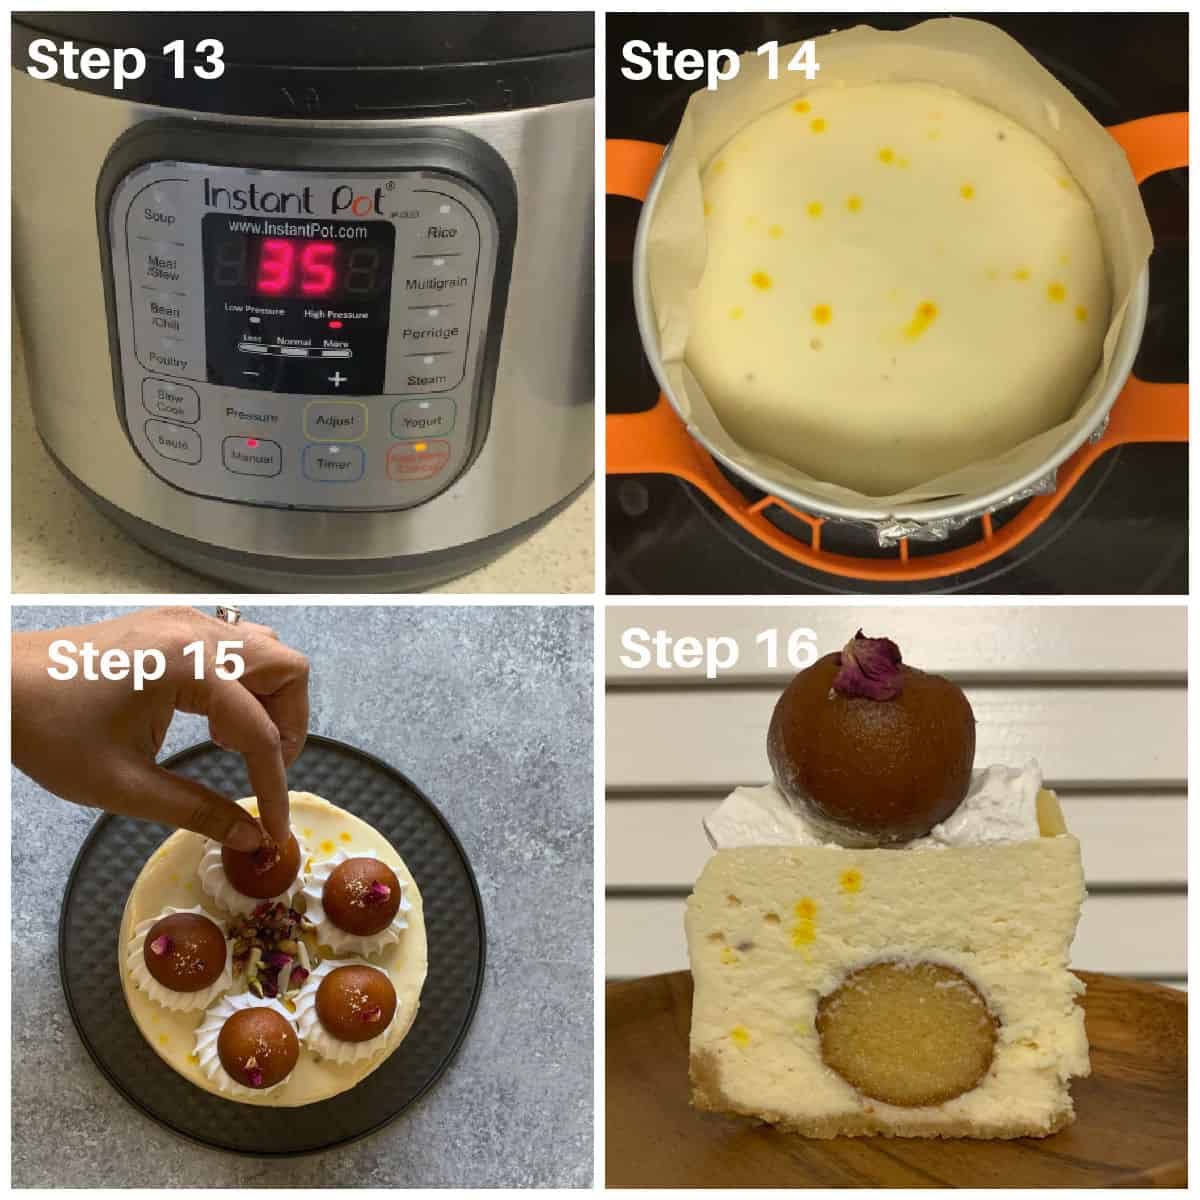 Steaming cheesecake in an Instant Pot